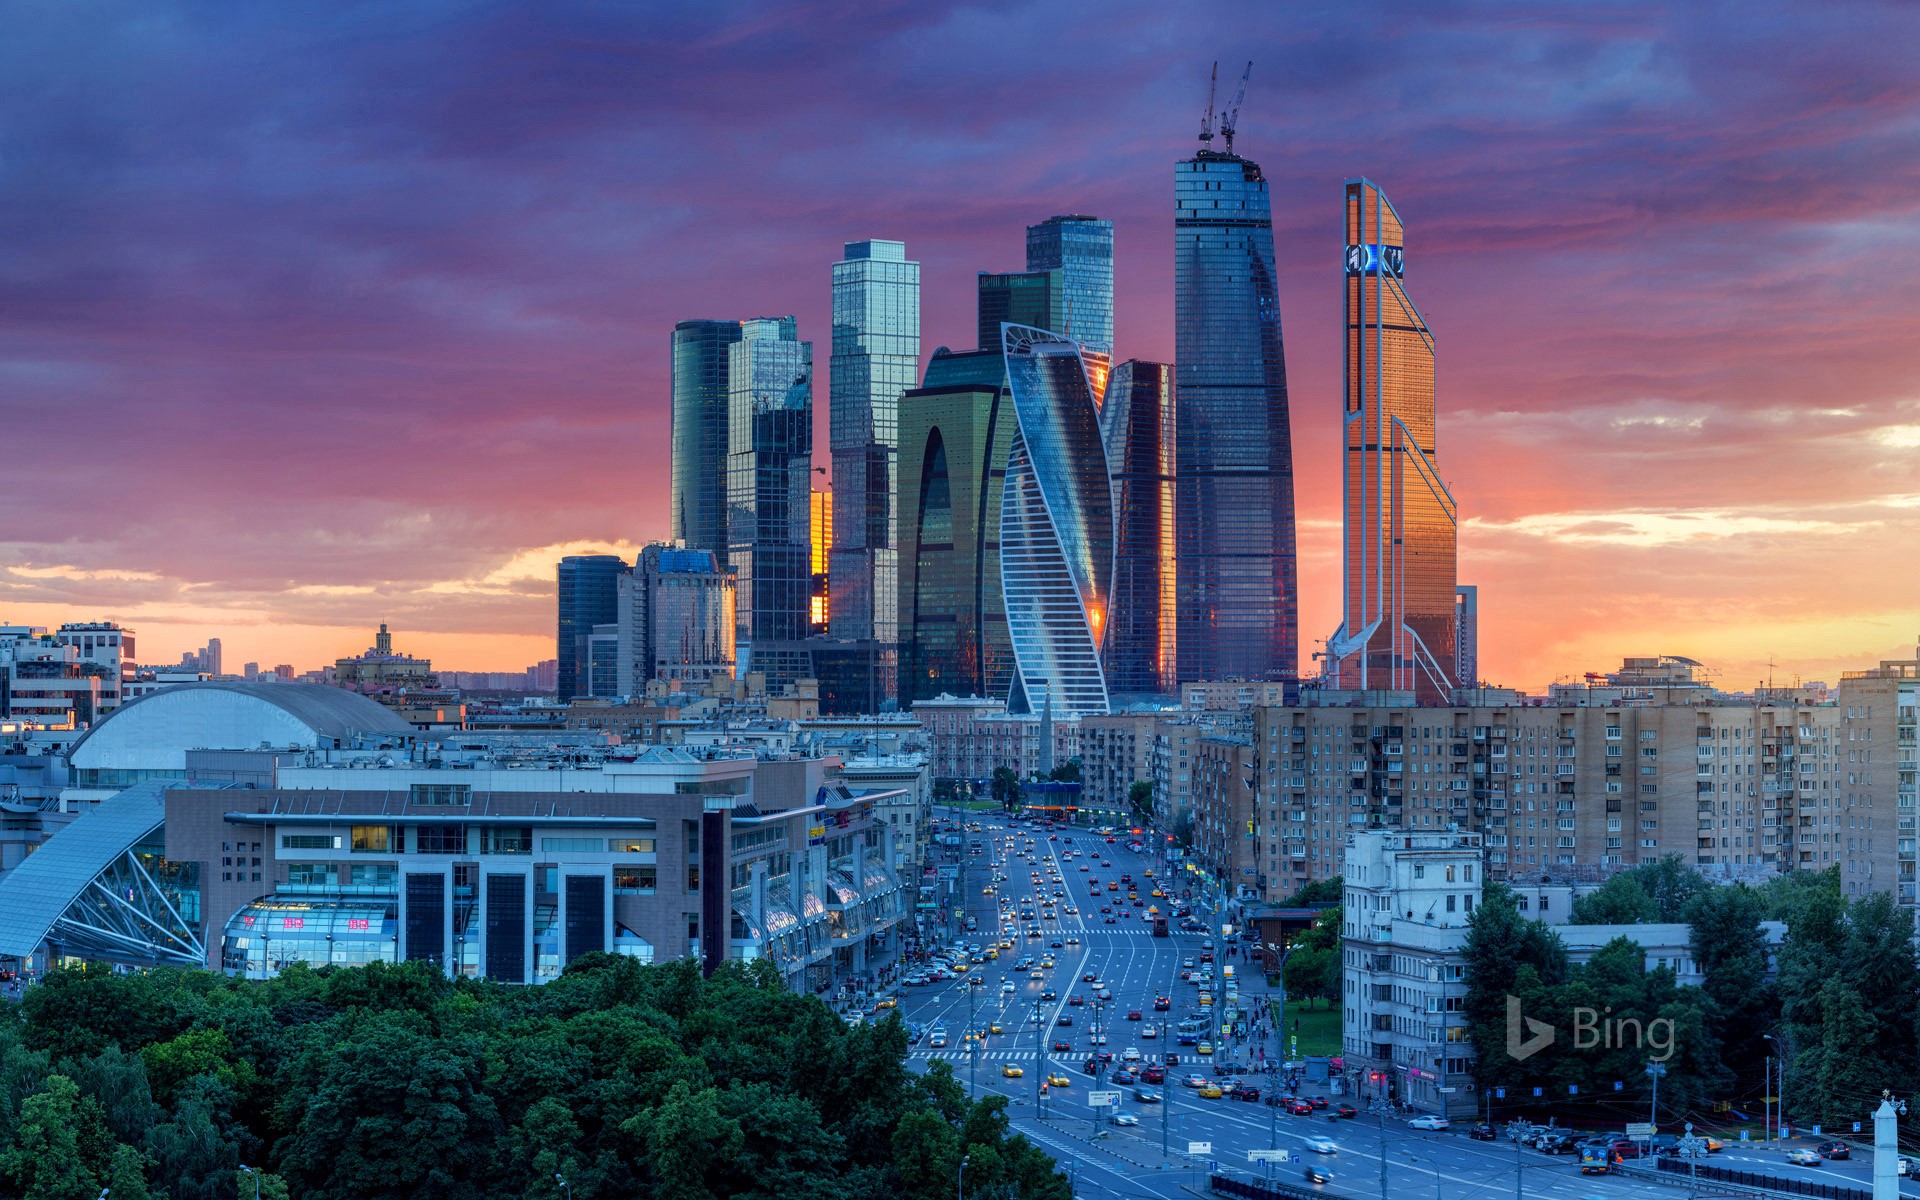 Moscow International Business Centre in Russia